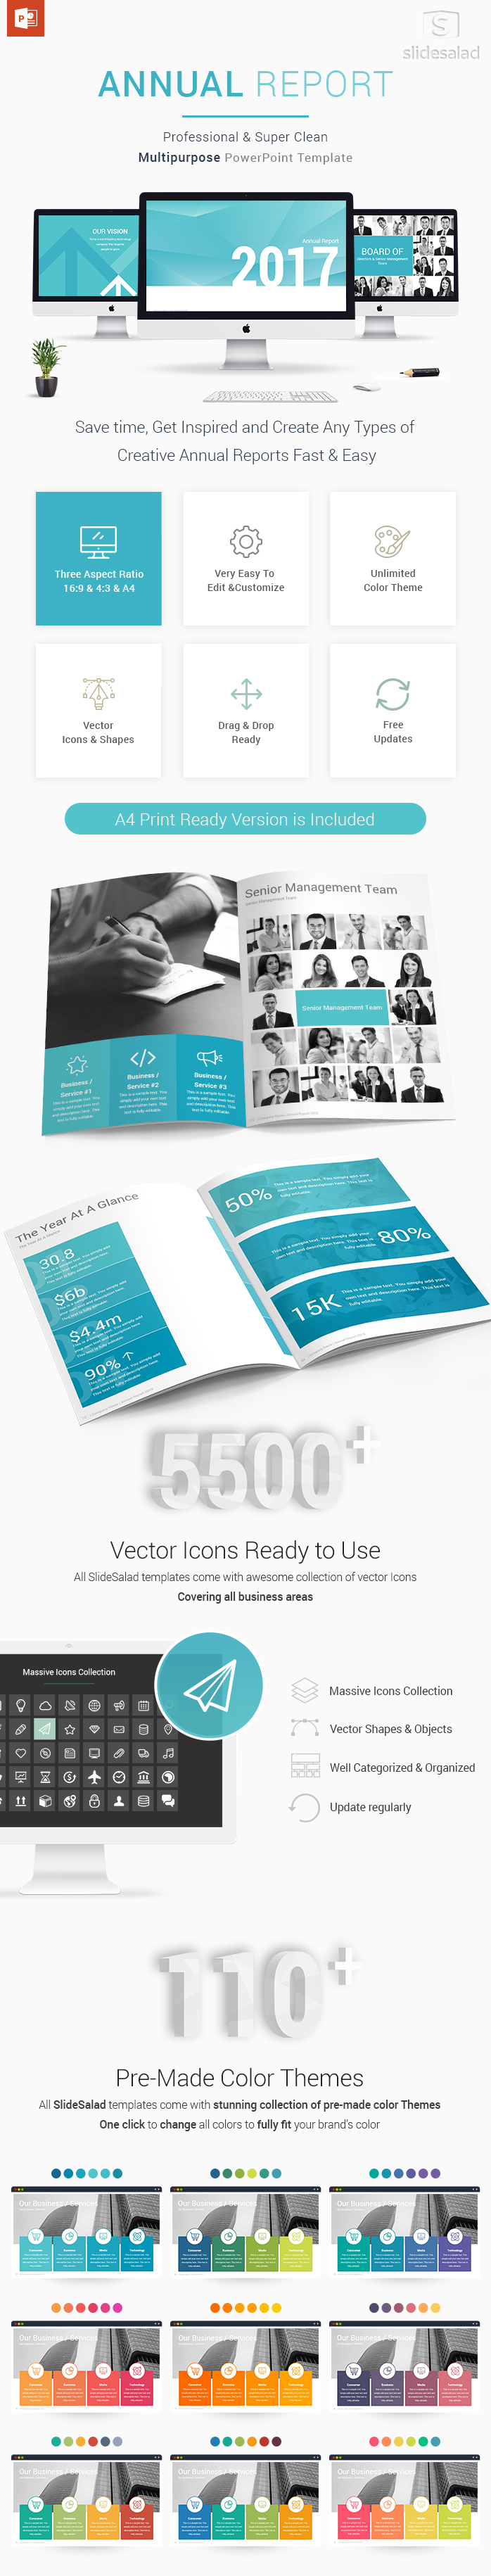 Best Annual Report PowerPoint Presentation Templates